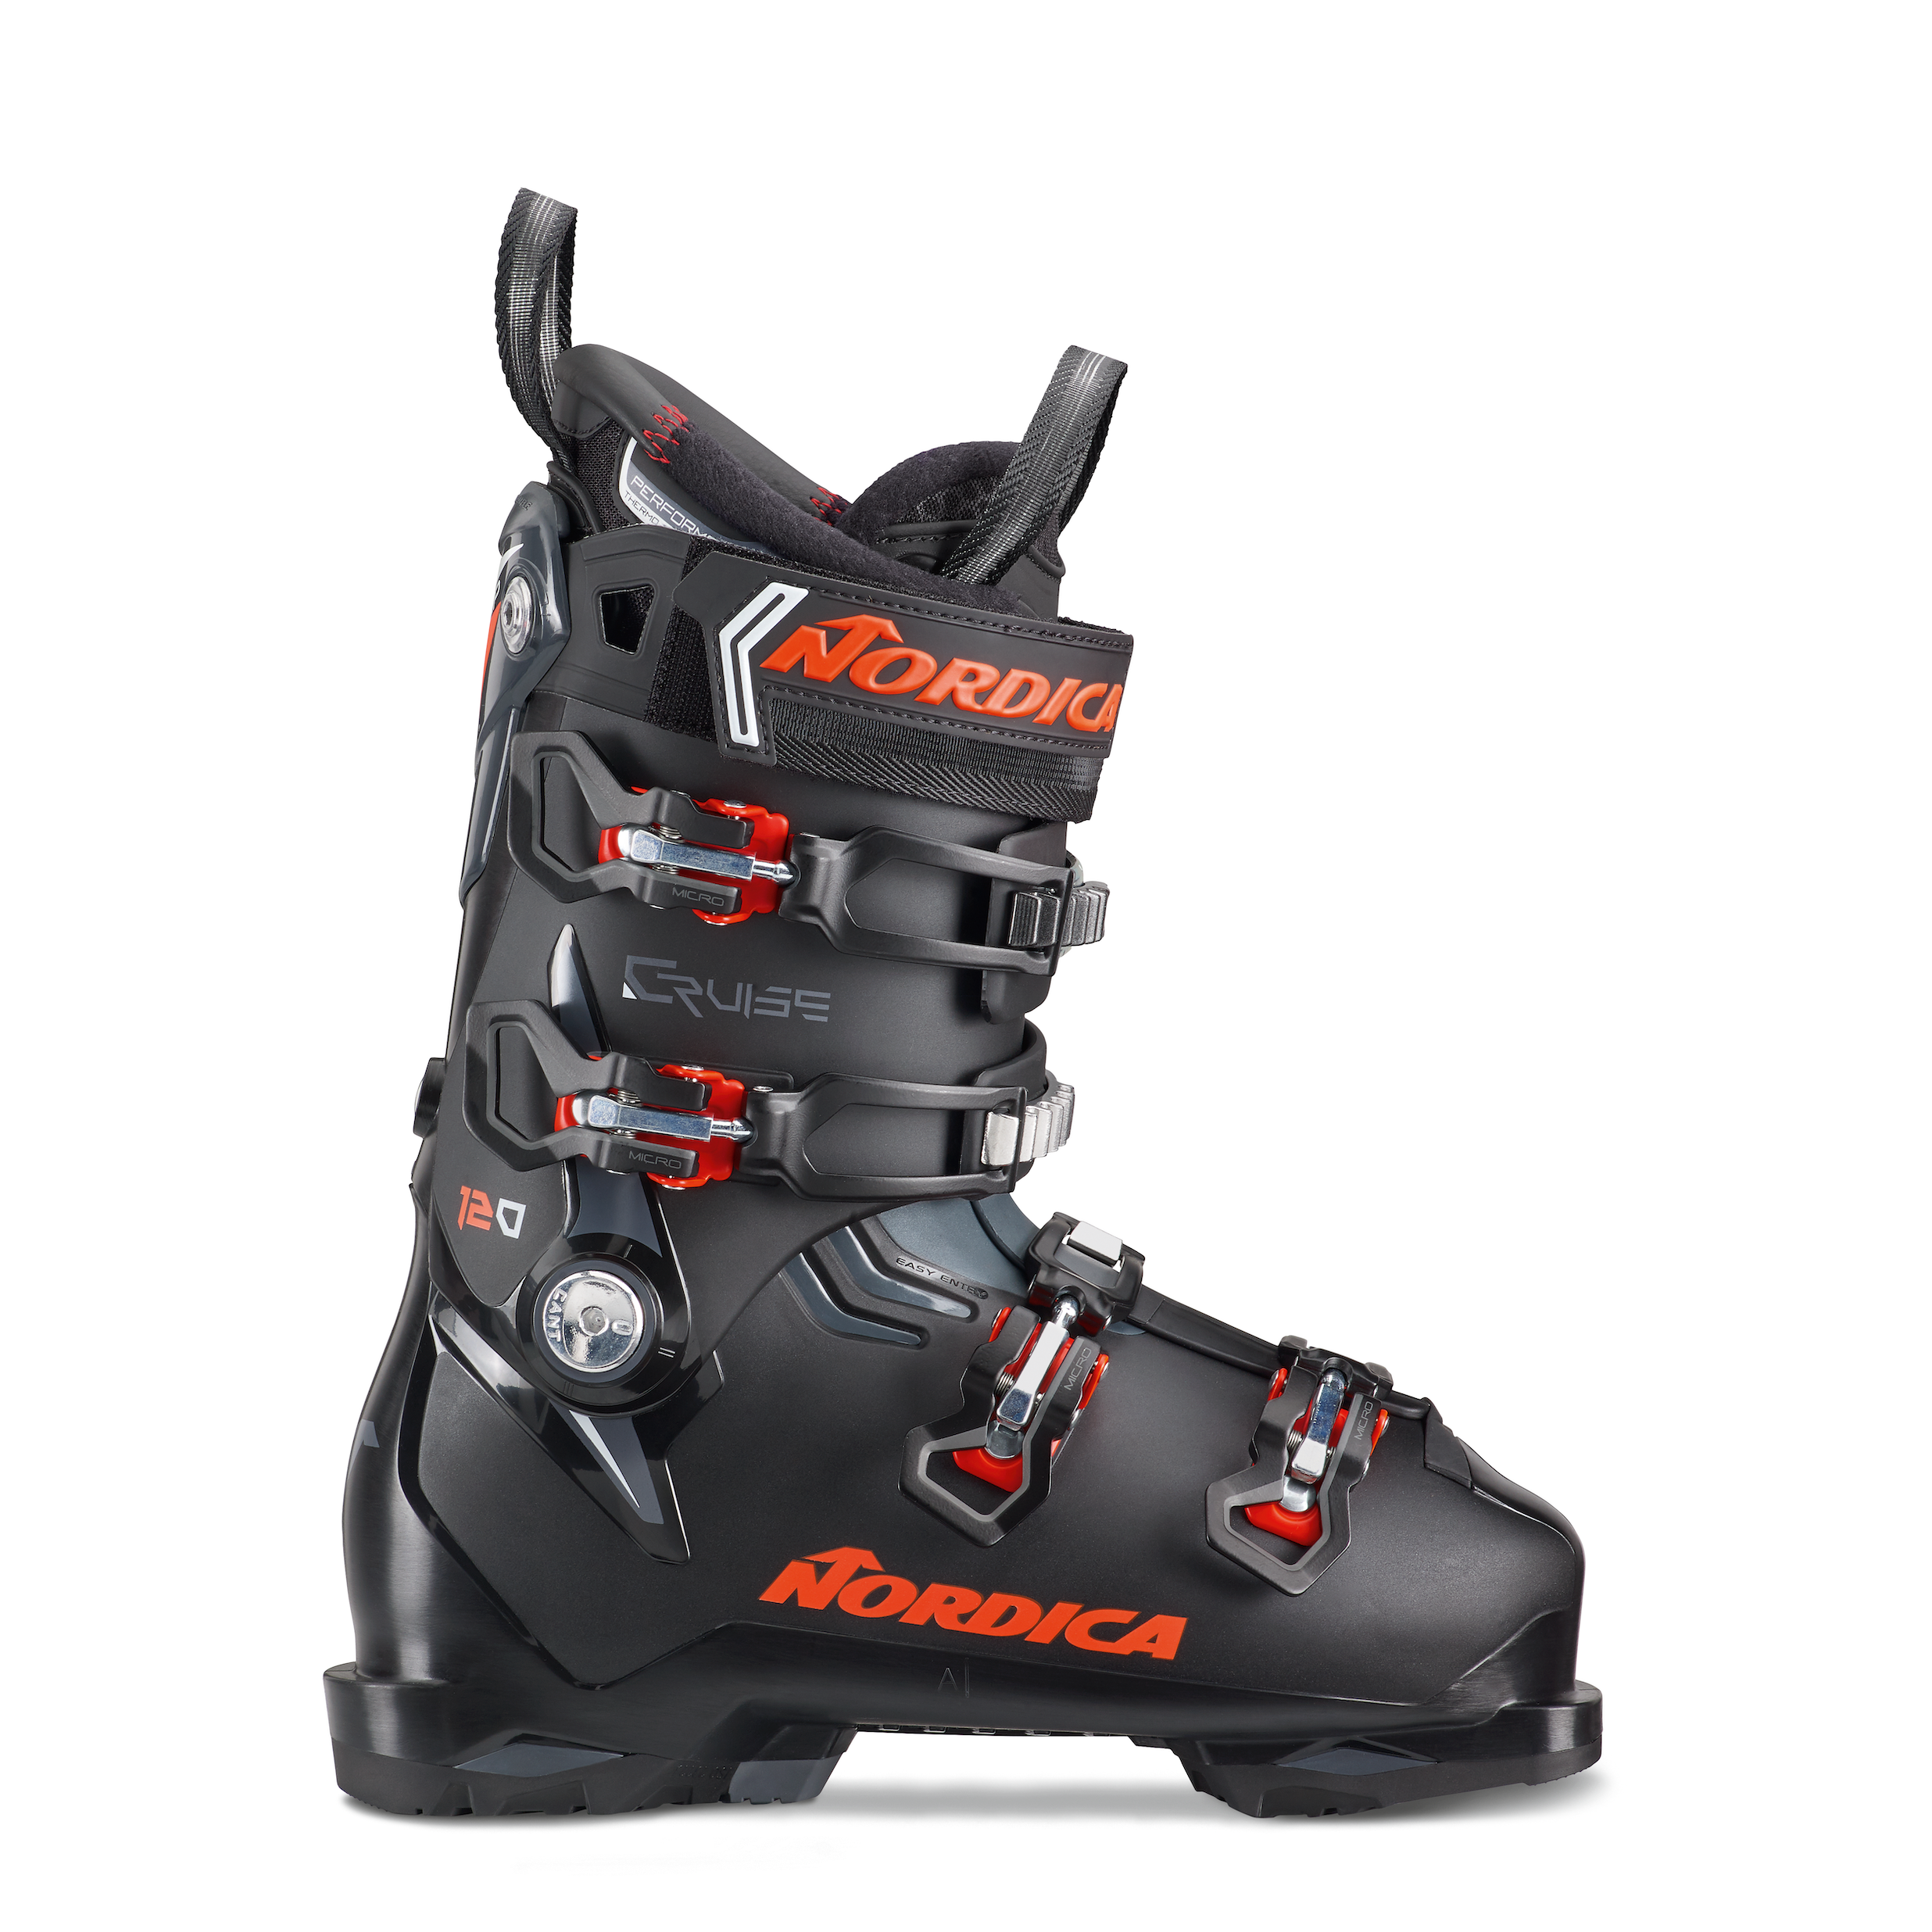 Black with red accents men's Nordica Cruise 120 ski boot.